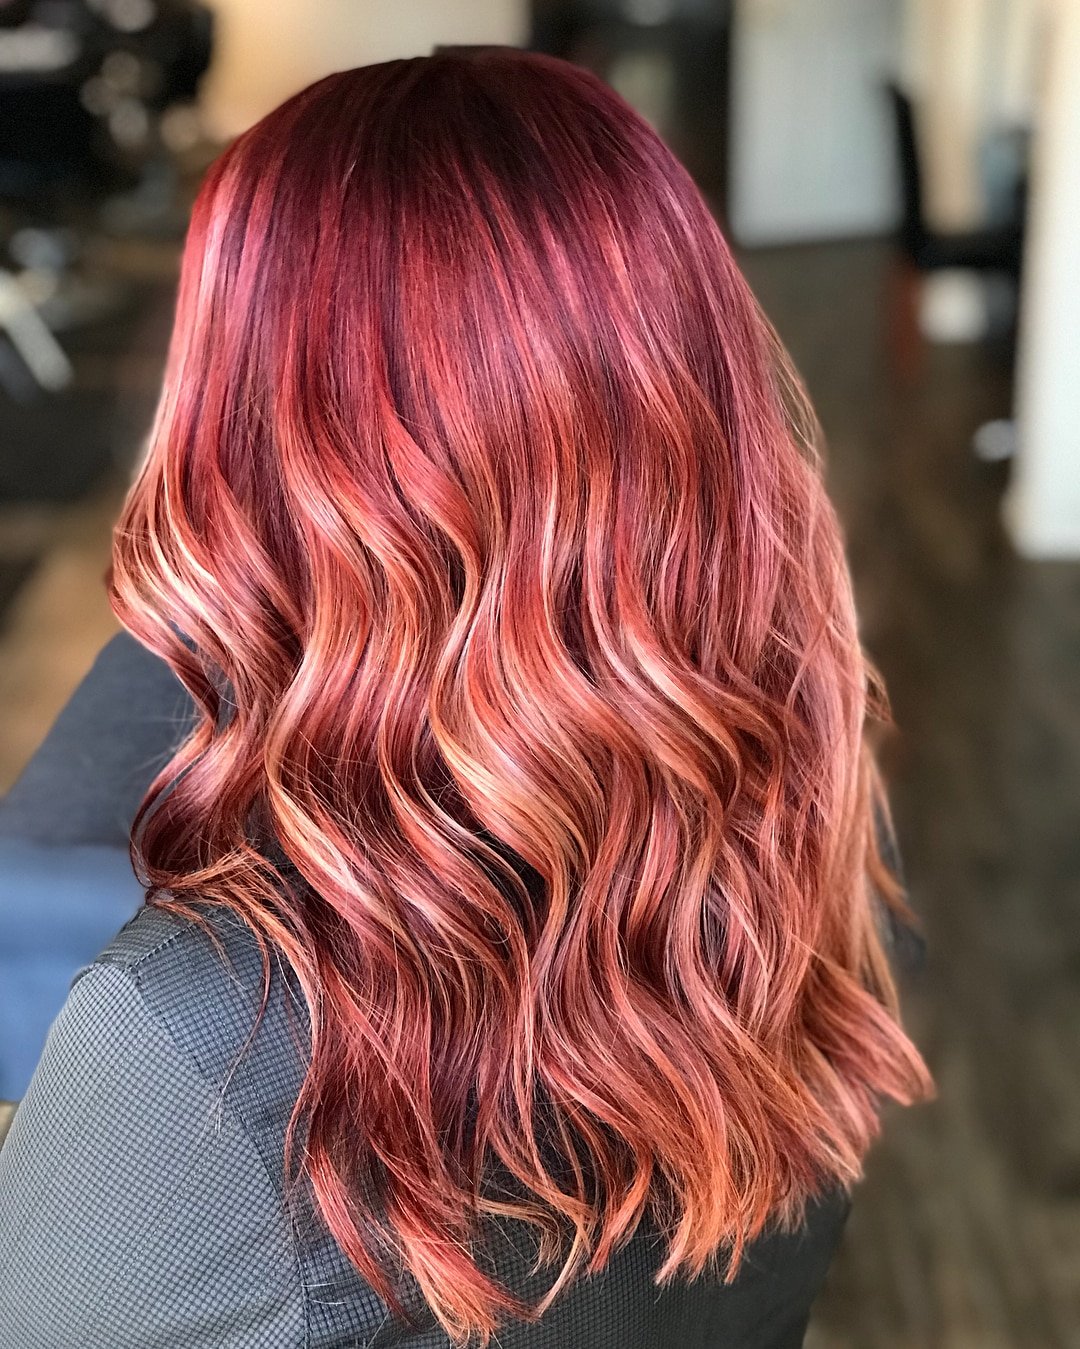 Crimson Red Hair with Blonde Highlights